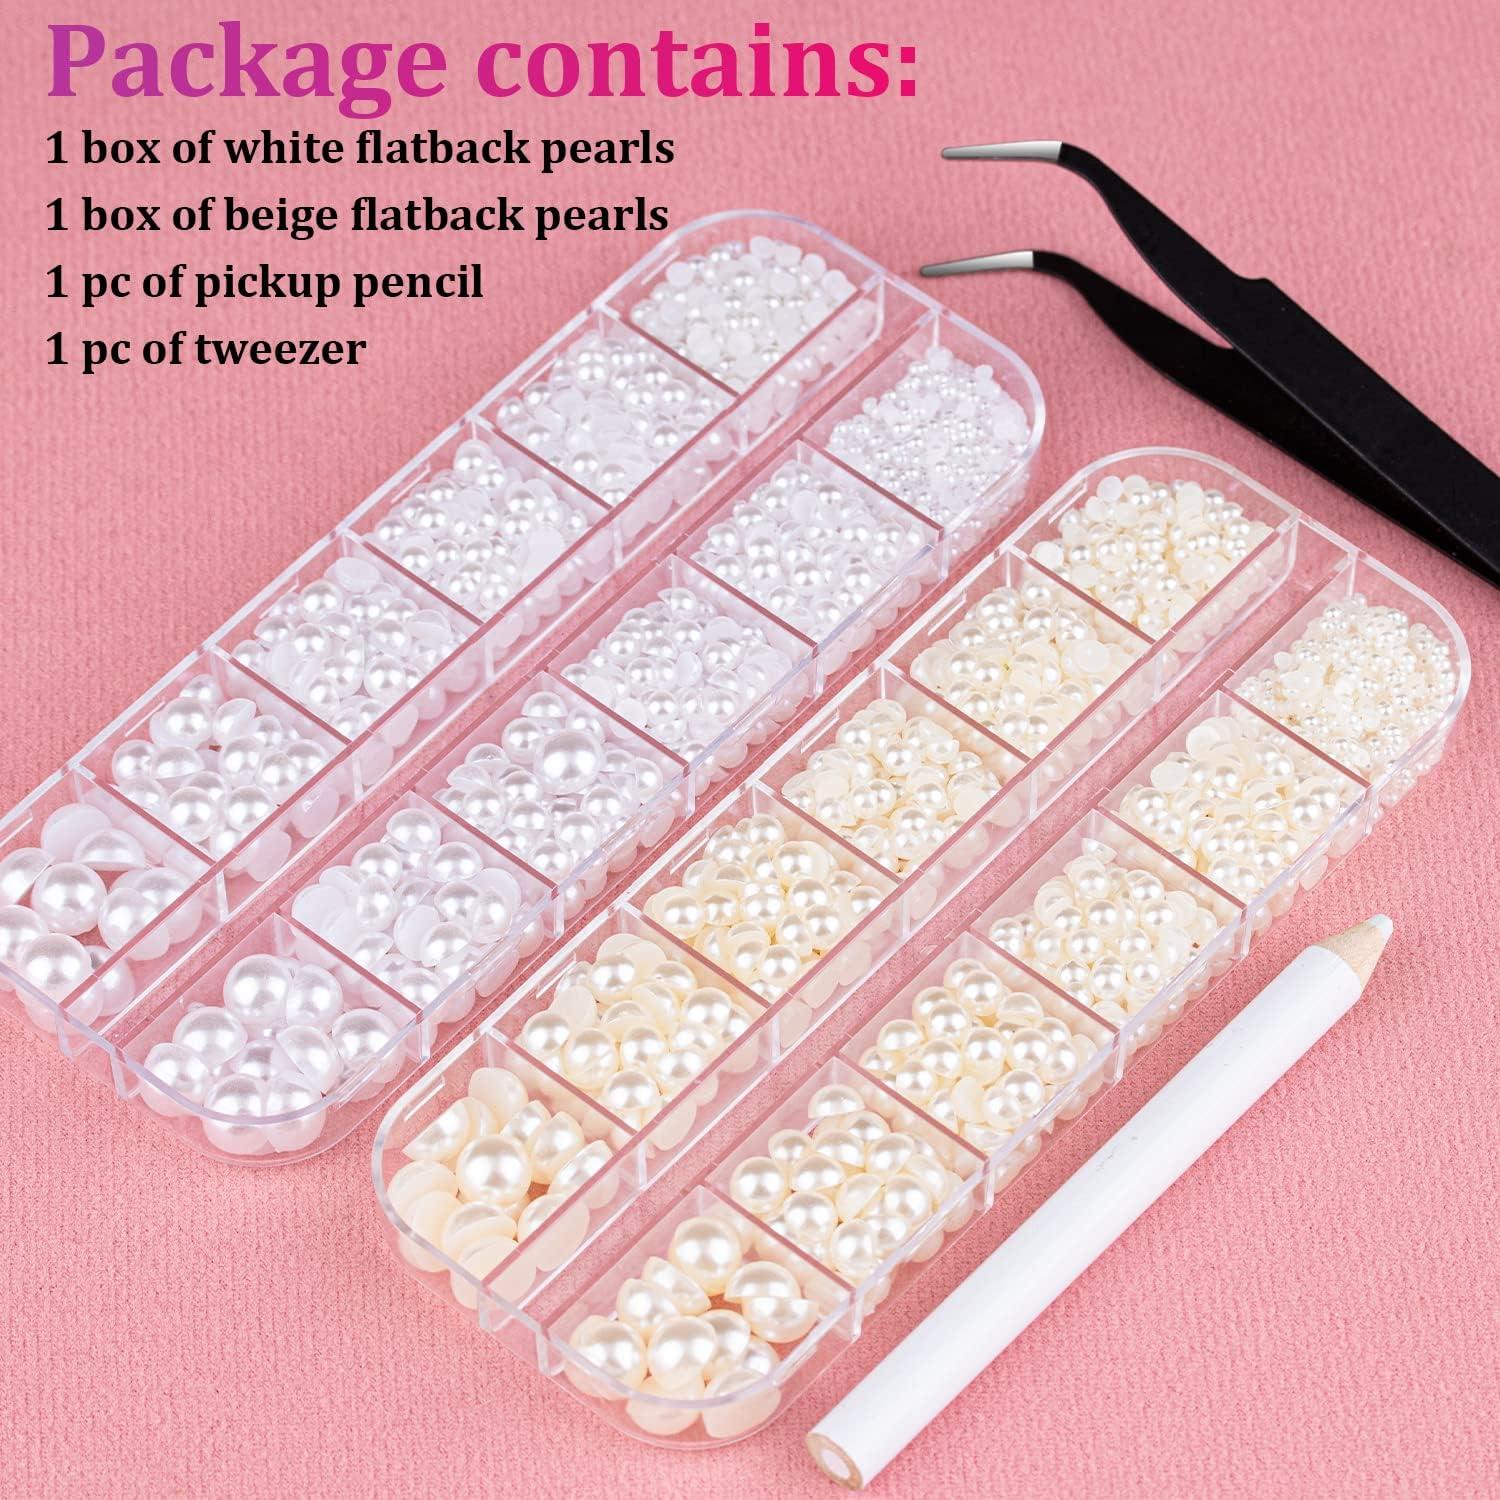 RODAKY 2000Pcs Beige Flatback AB Pearls for Nails Art 6 Size Half Round  Pearls Beads with Pickup Pencil and Tweezer for DIY Craft Nail Face Art  Phone